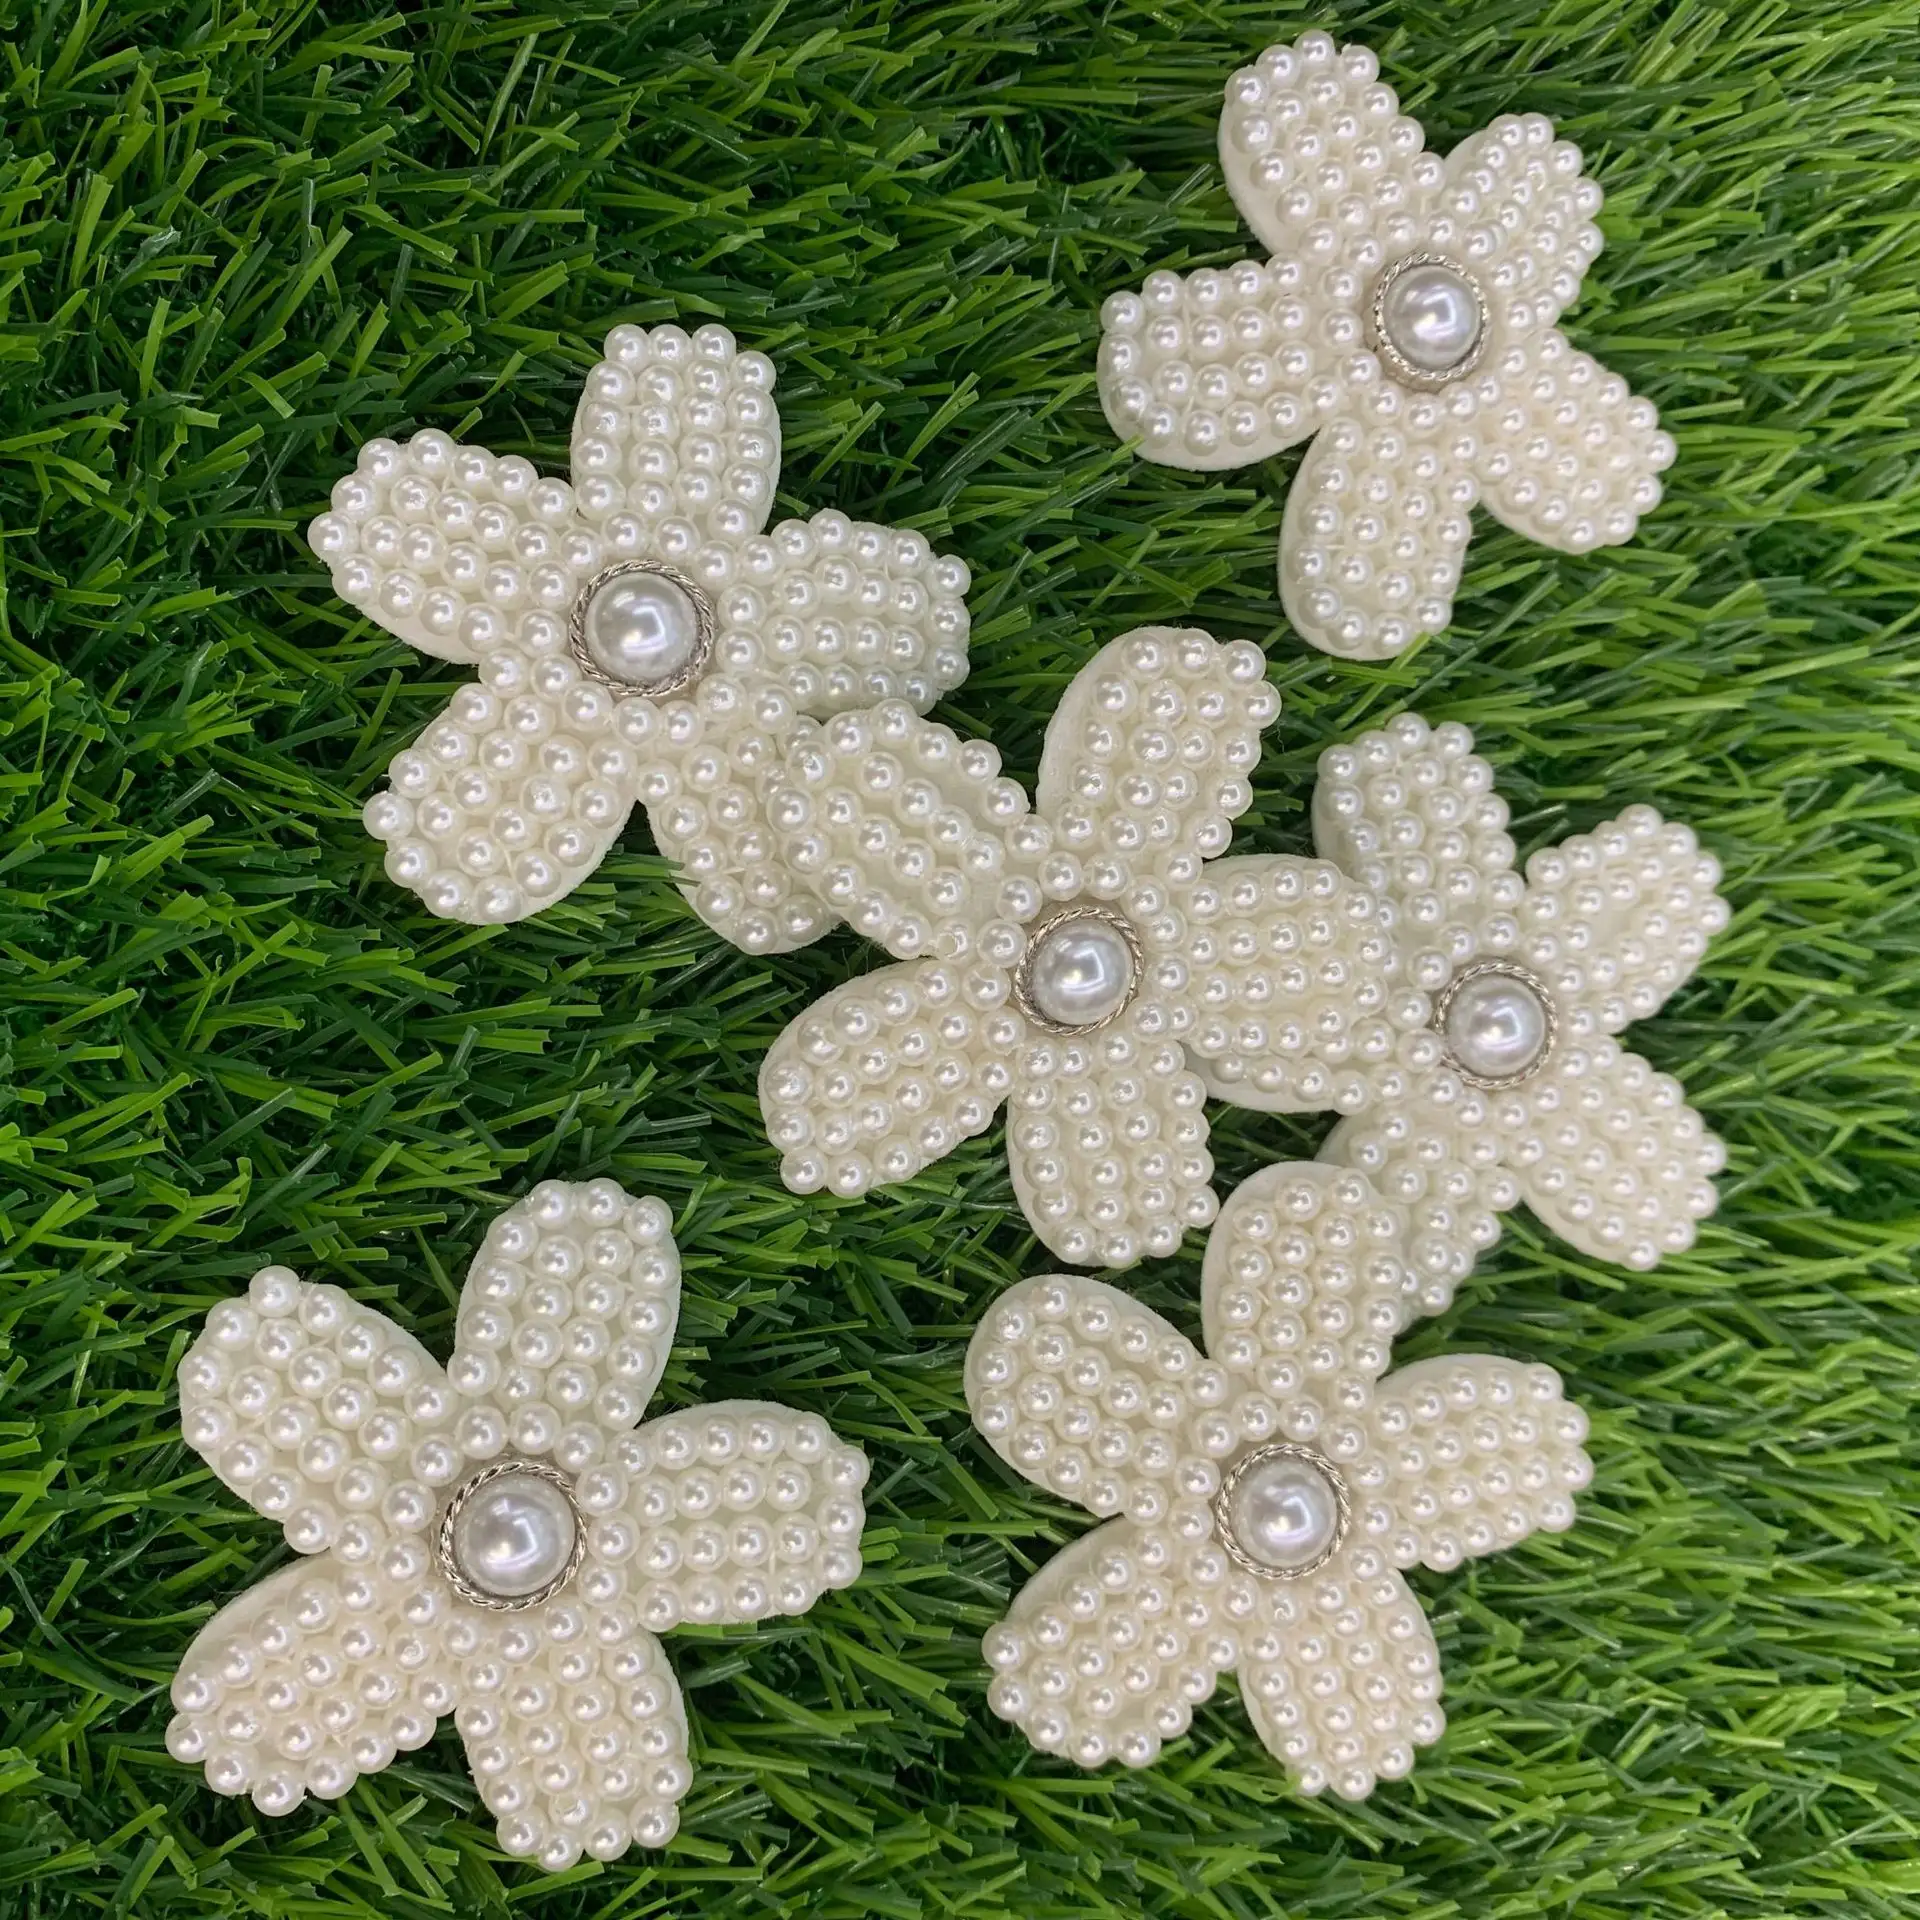 5*5 cm white beads pearls badge 3 d flowers Rhinestone applique for brooch clothing accessories